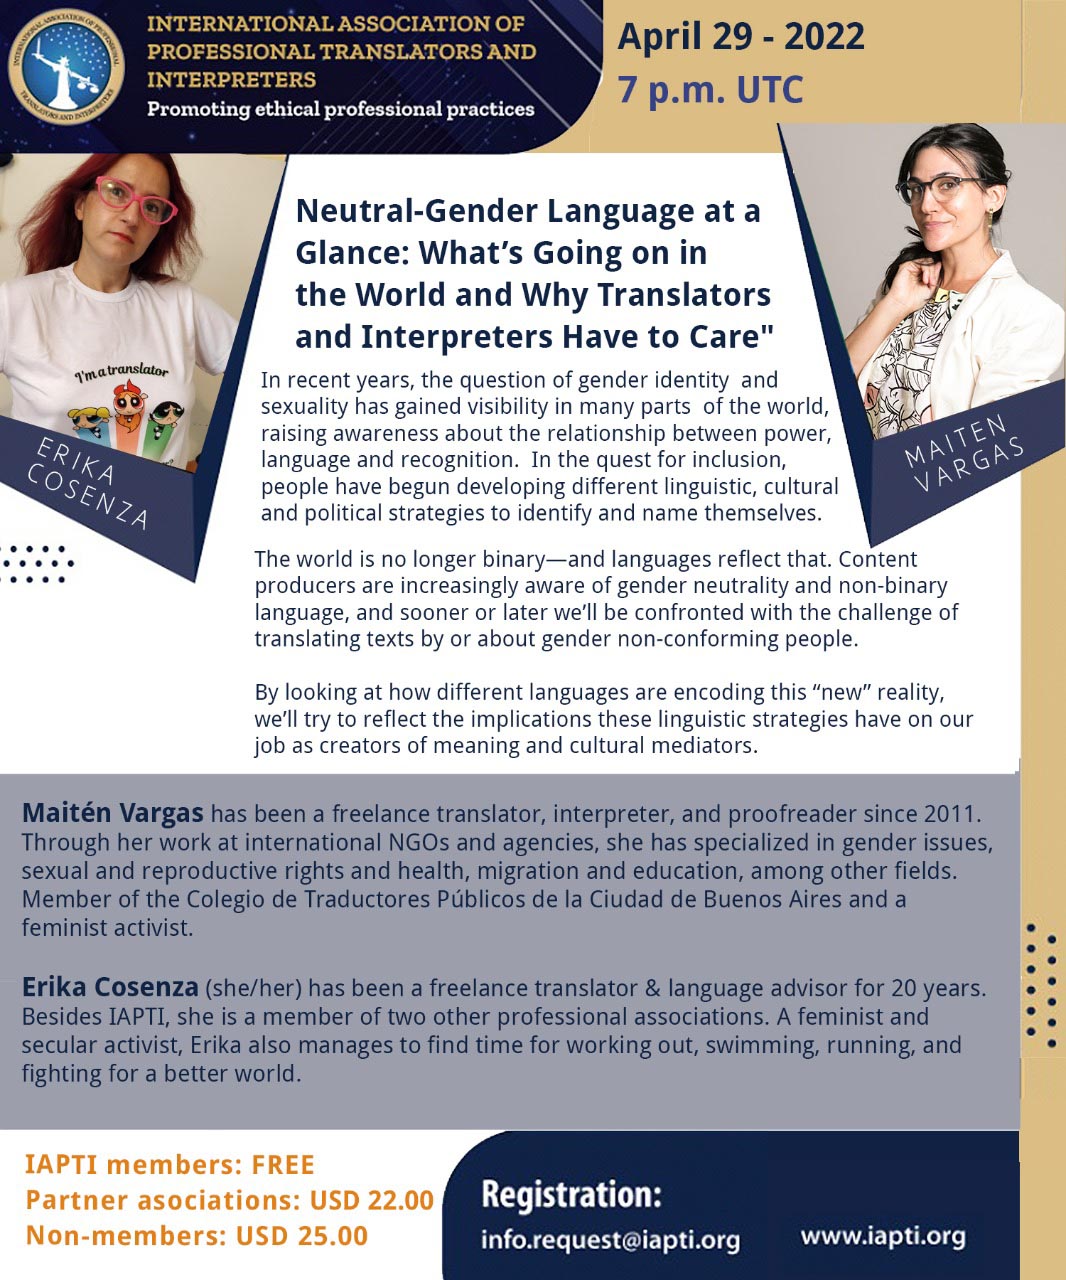 La imagen muestra el flyer, en inglés, del webinario «Gender Neutral Language at a Glance: What's Going on in the World and Why Translators and Interpreters Have to Care».